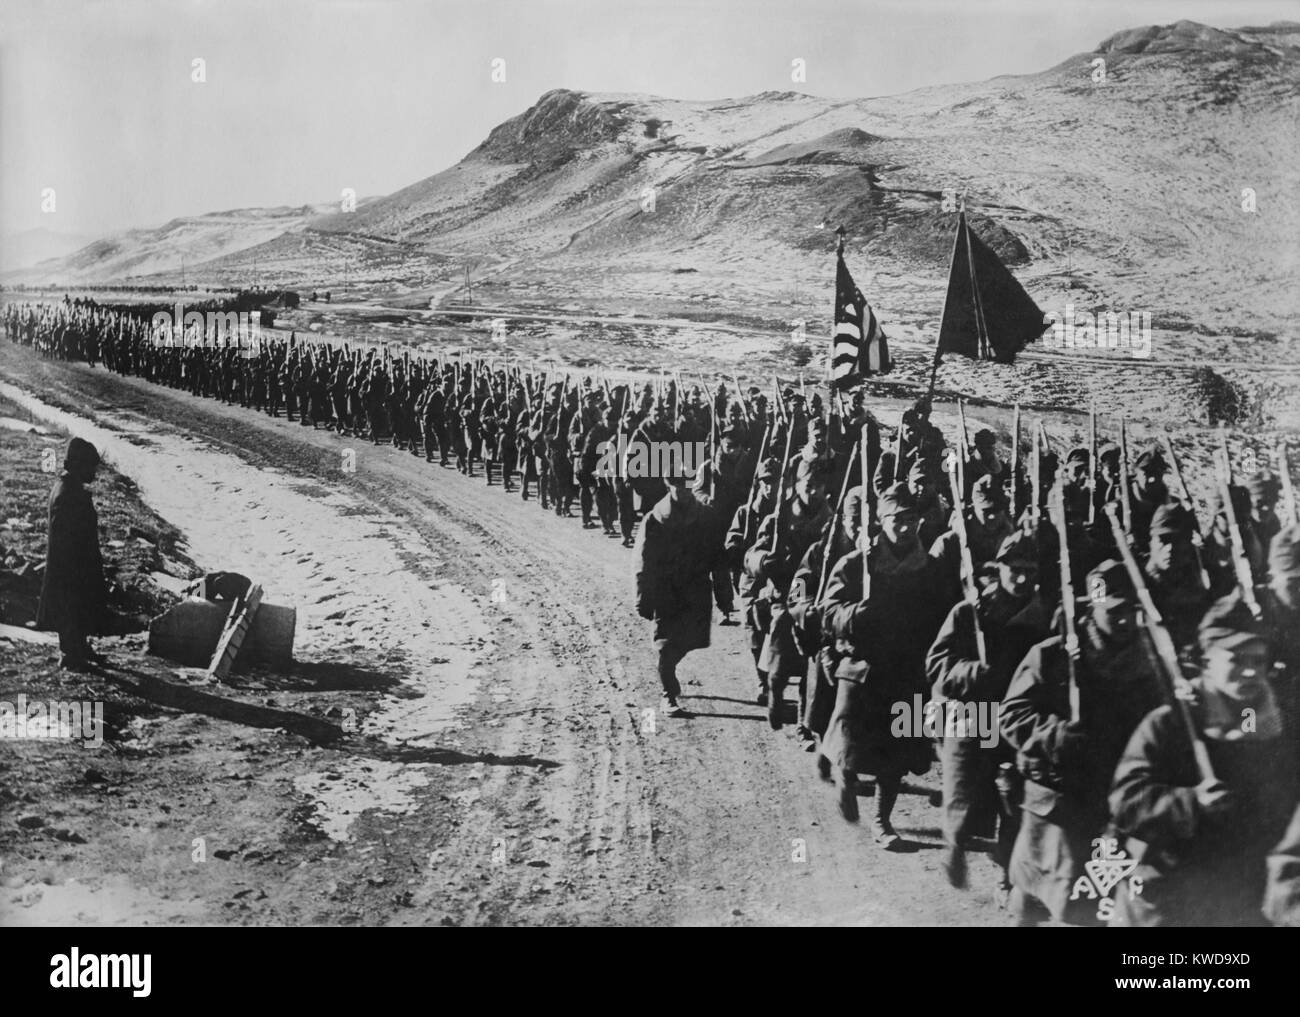 American Expeditionary Force Siberia, 31st Infantry, on the march in Far Eastern Russia, 1918-20. They were sent inland to guard the Trans-Siberian railway of from both the Reds and Whites during the Russian Revolution and Civil War (BSLOC 2016 10 93) Stock Photo